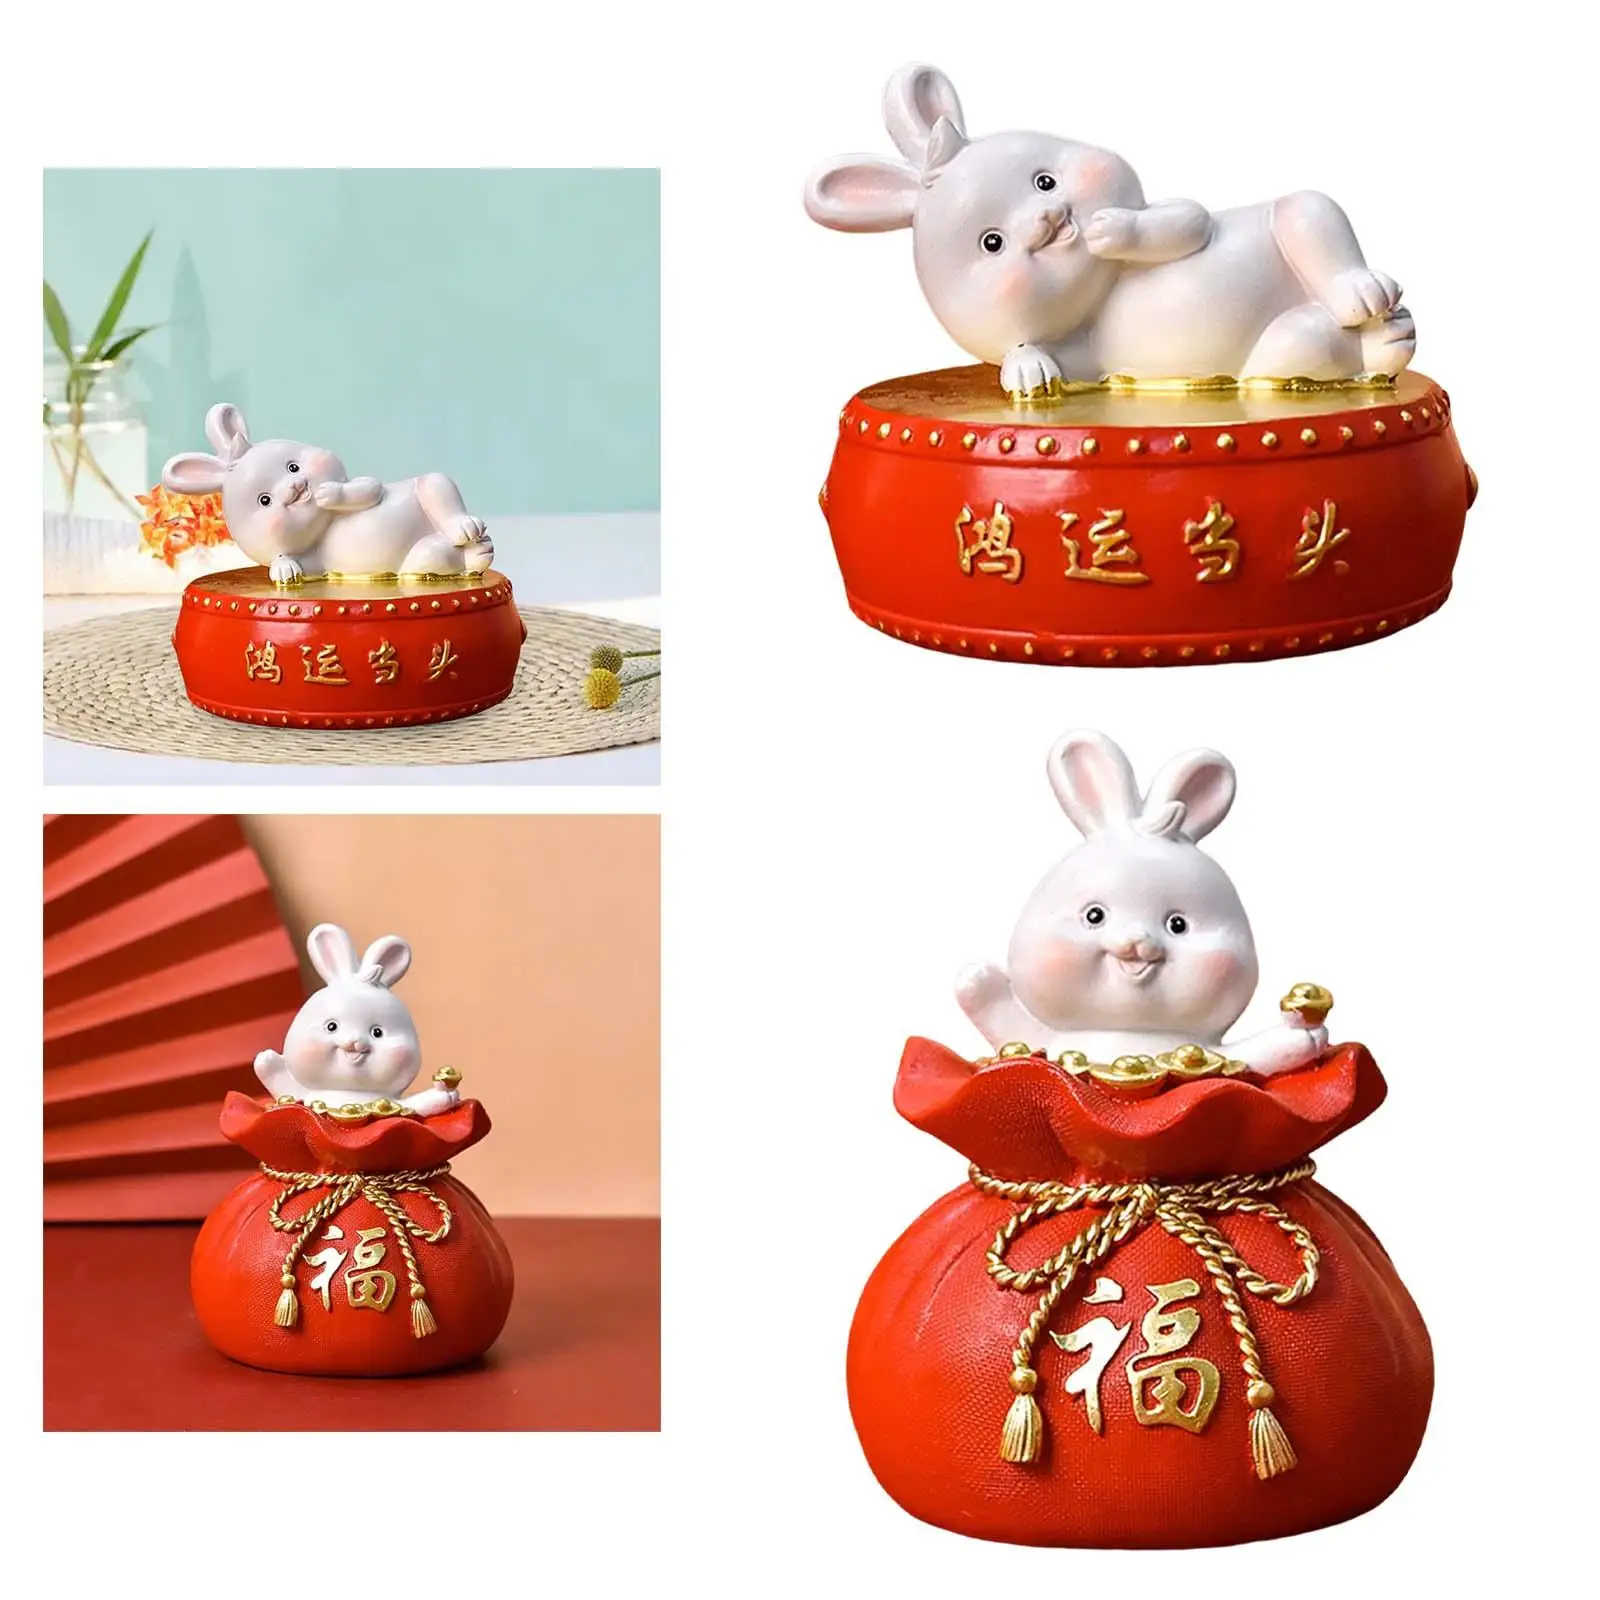 Lucky Rabbit Statue Money Box Figurines Ornament for Spring Festival Cabinet